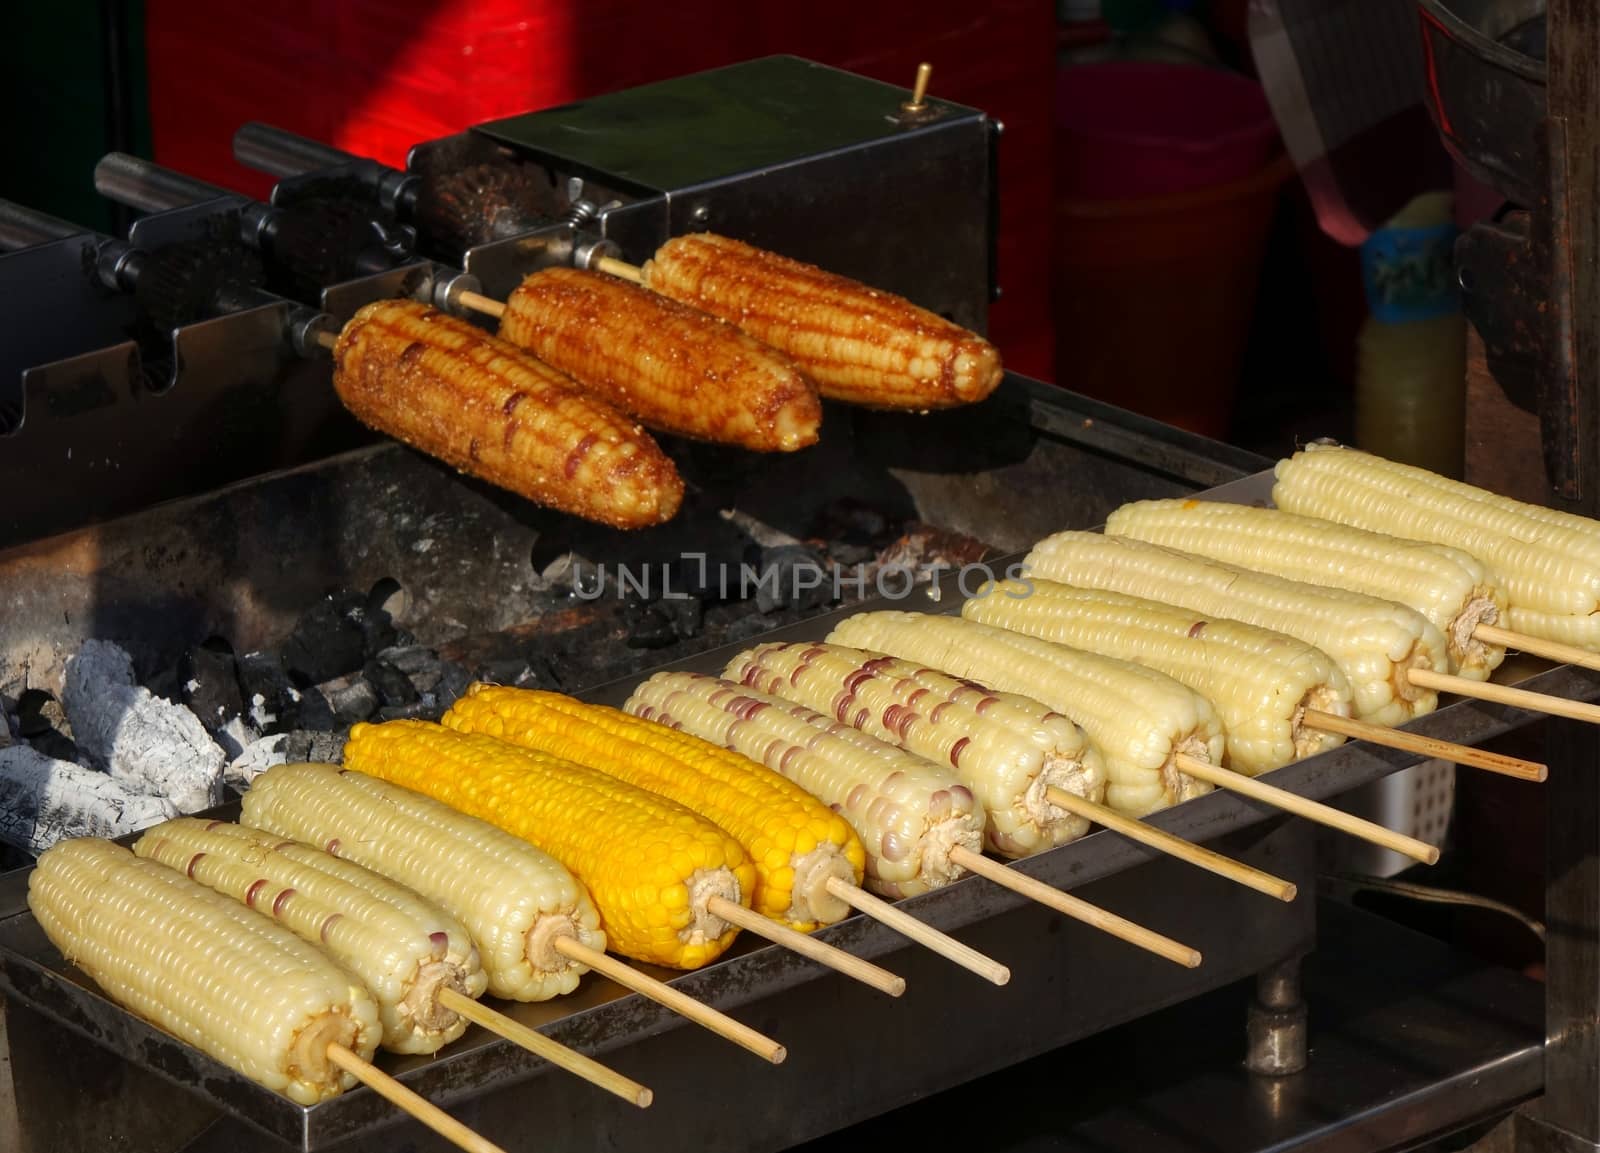 Grilled corn cobs with barbecue sauce are a popular street food in Taiwan
